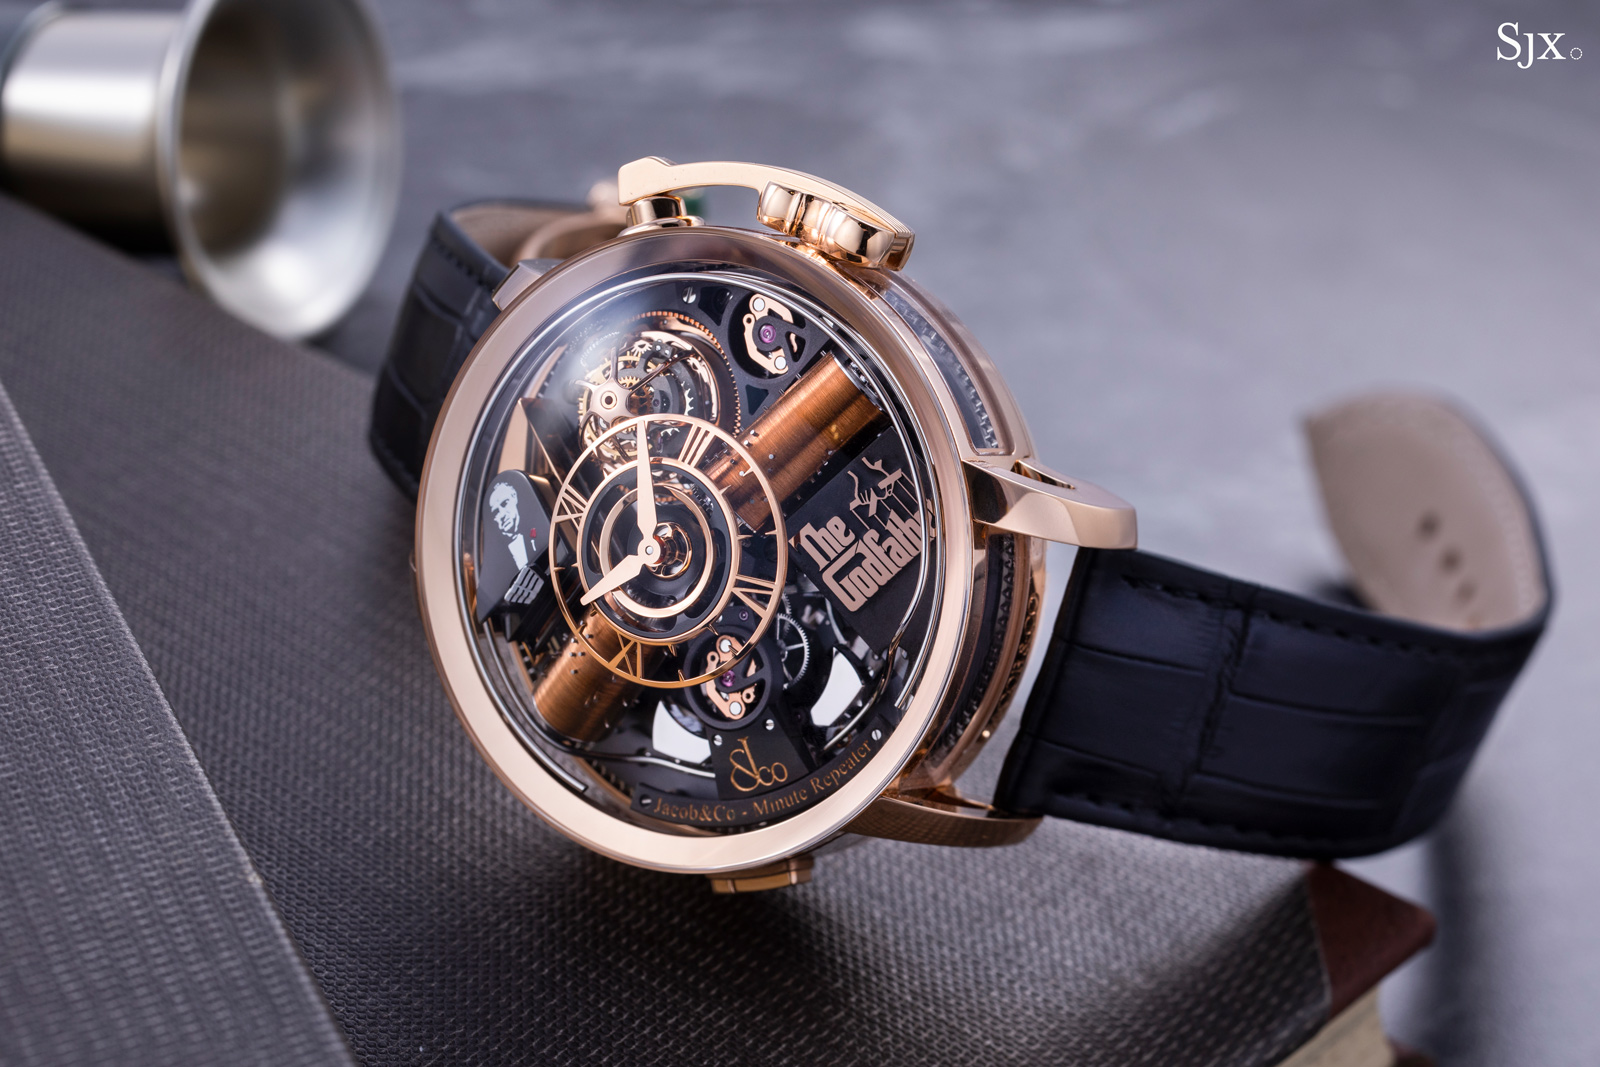 Up Close: Jacob & Co. Opera Godfather Minute Repeater